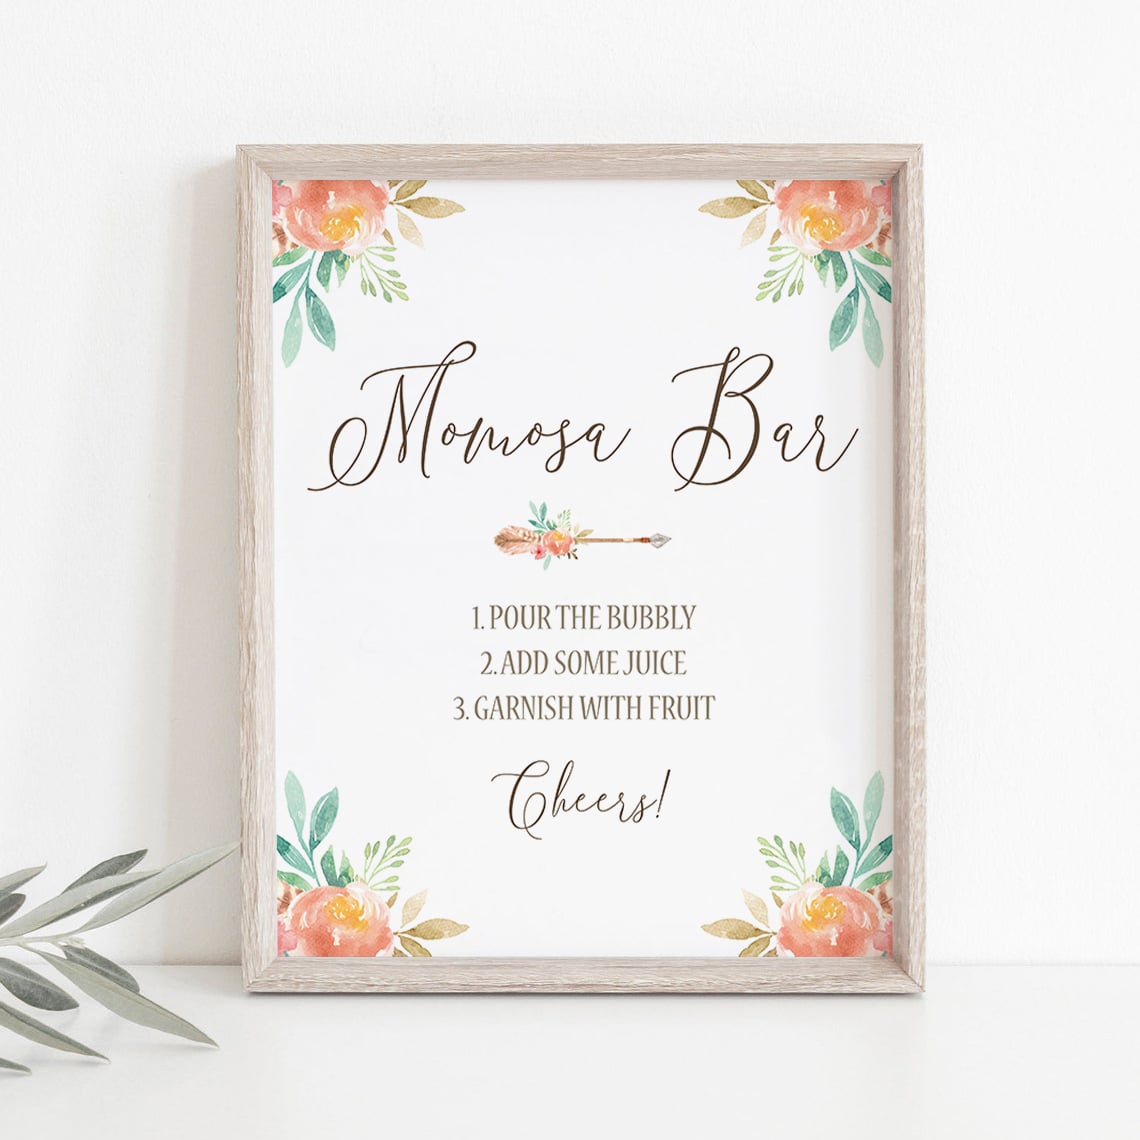 Tribal baby shower decorations momosa bar sign by LittleSizzle